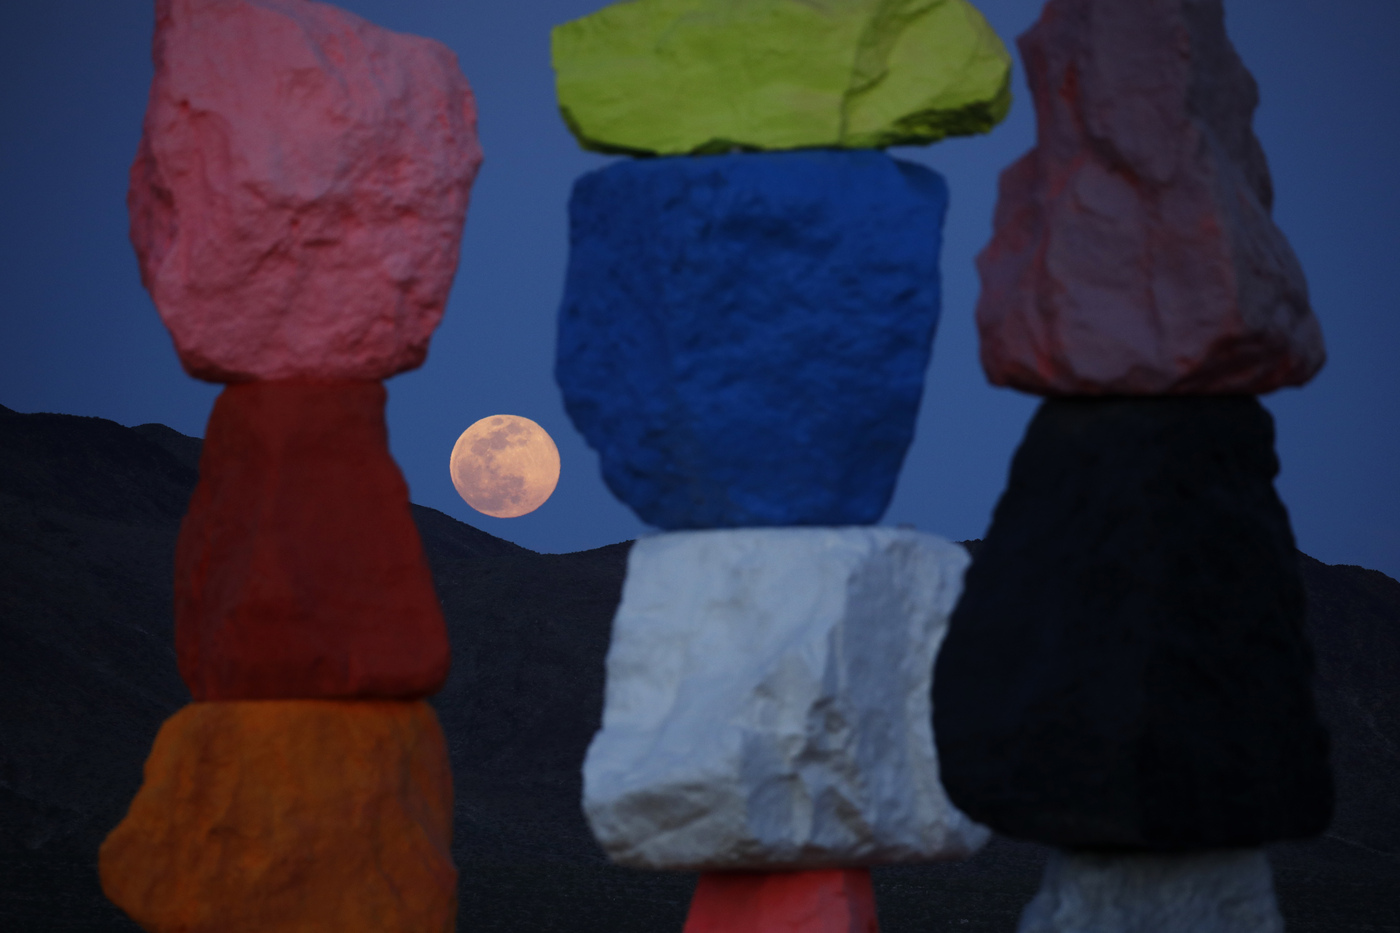 A supermoon rises behind the artwork titled Seven Magic Mountains by artist Ugo Rondinone, Tuesday, April 7, 2020, in Las Vegas. (AP Photo/John Locher)